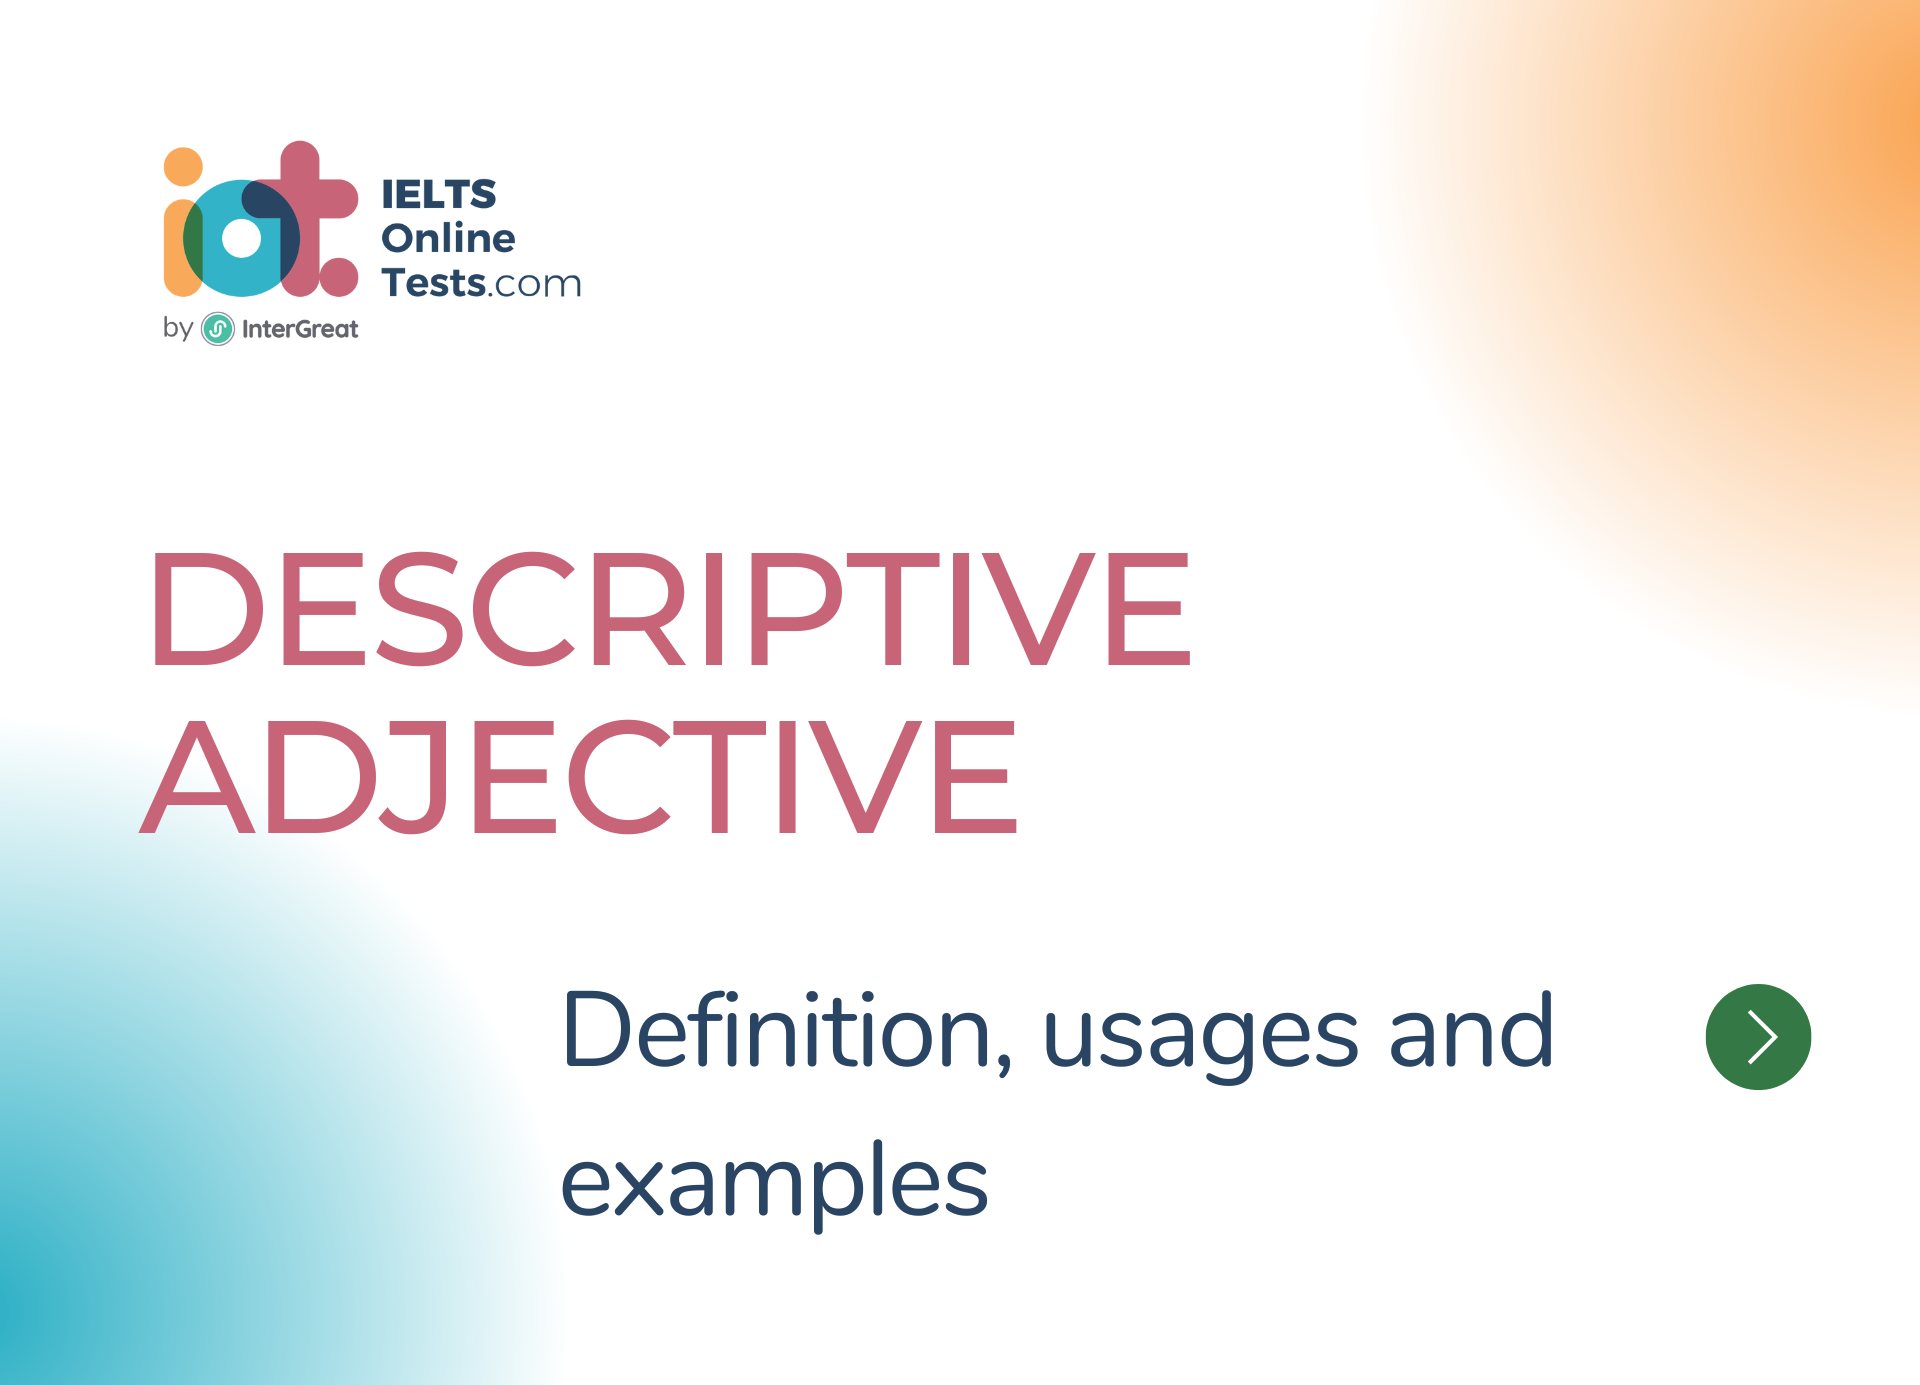 Descriptive adjective definition, usages and examples